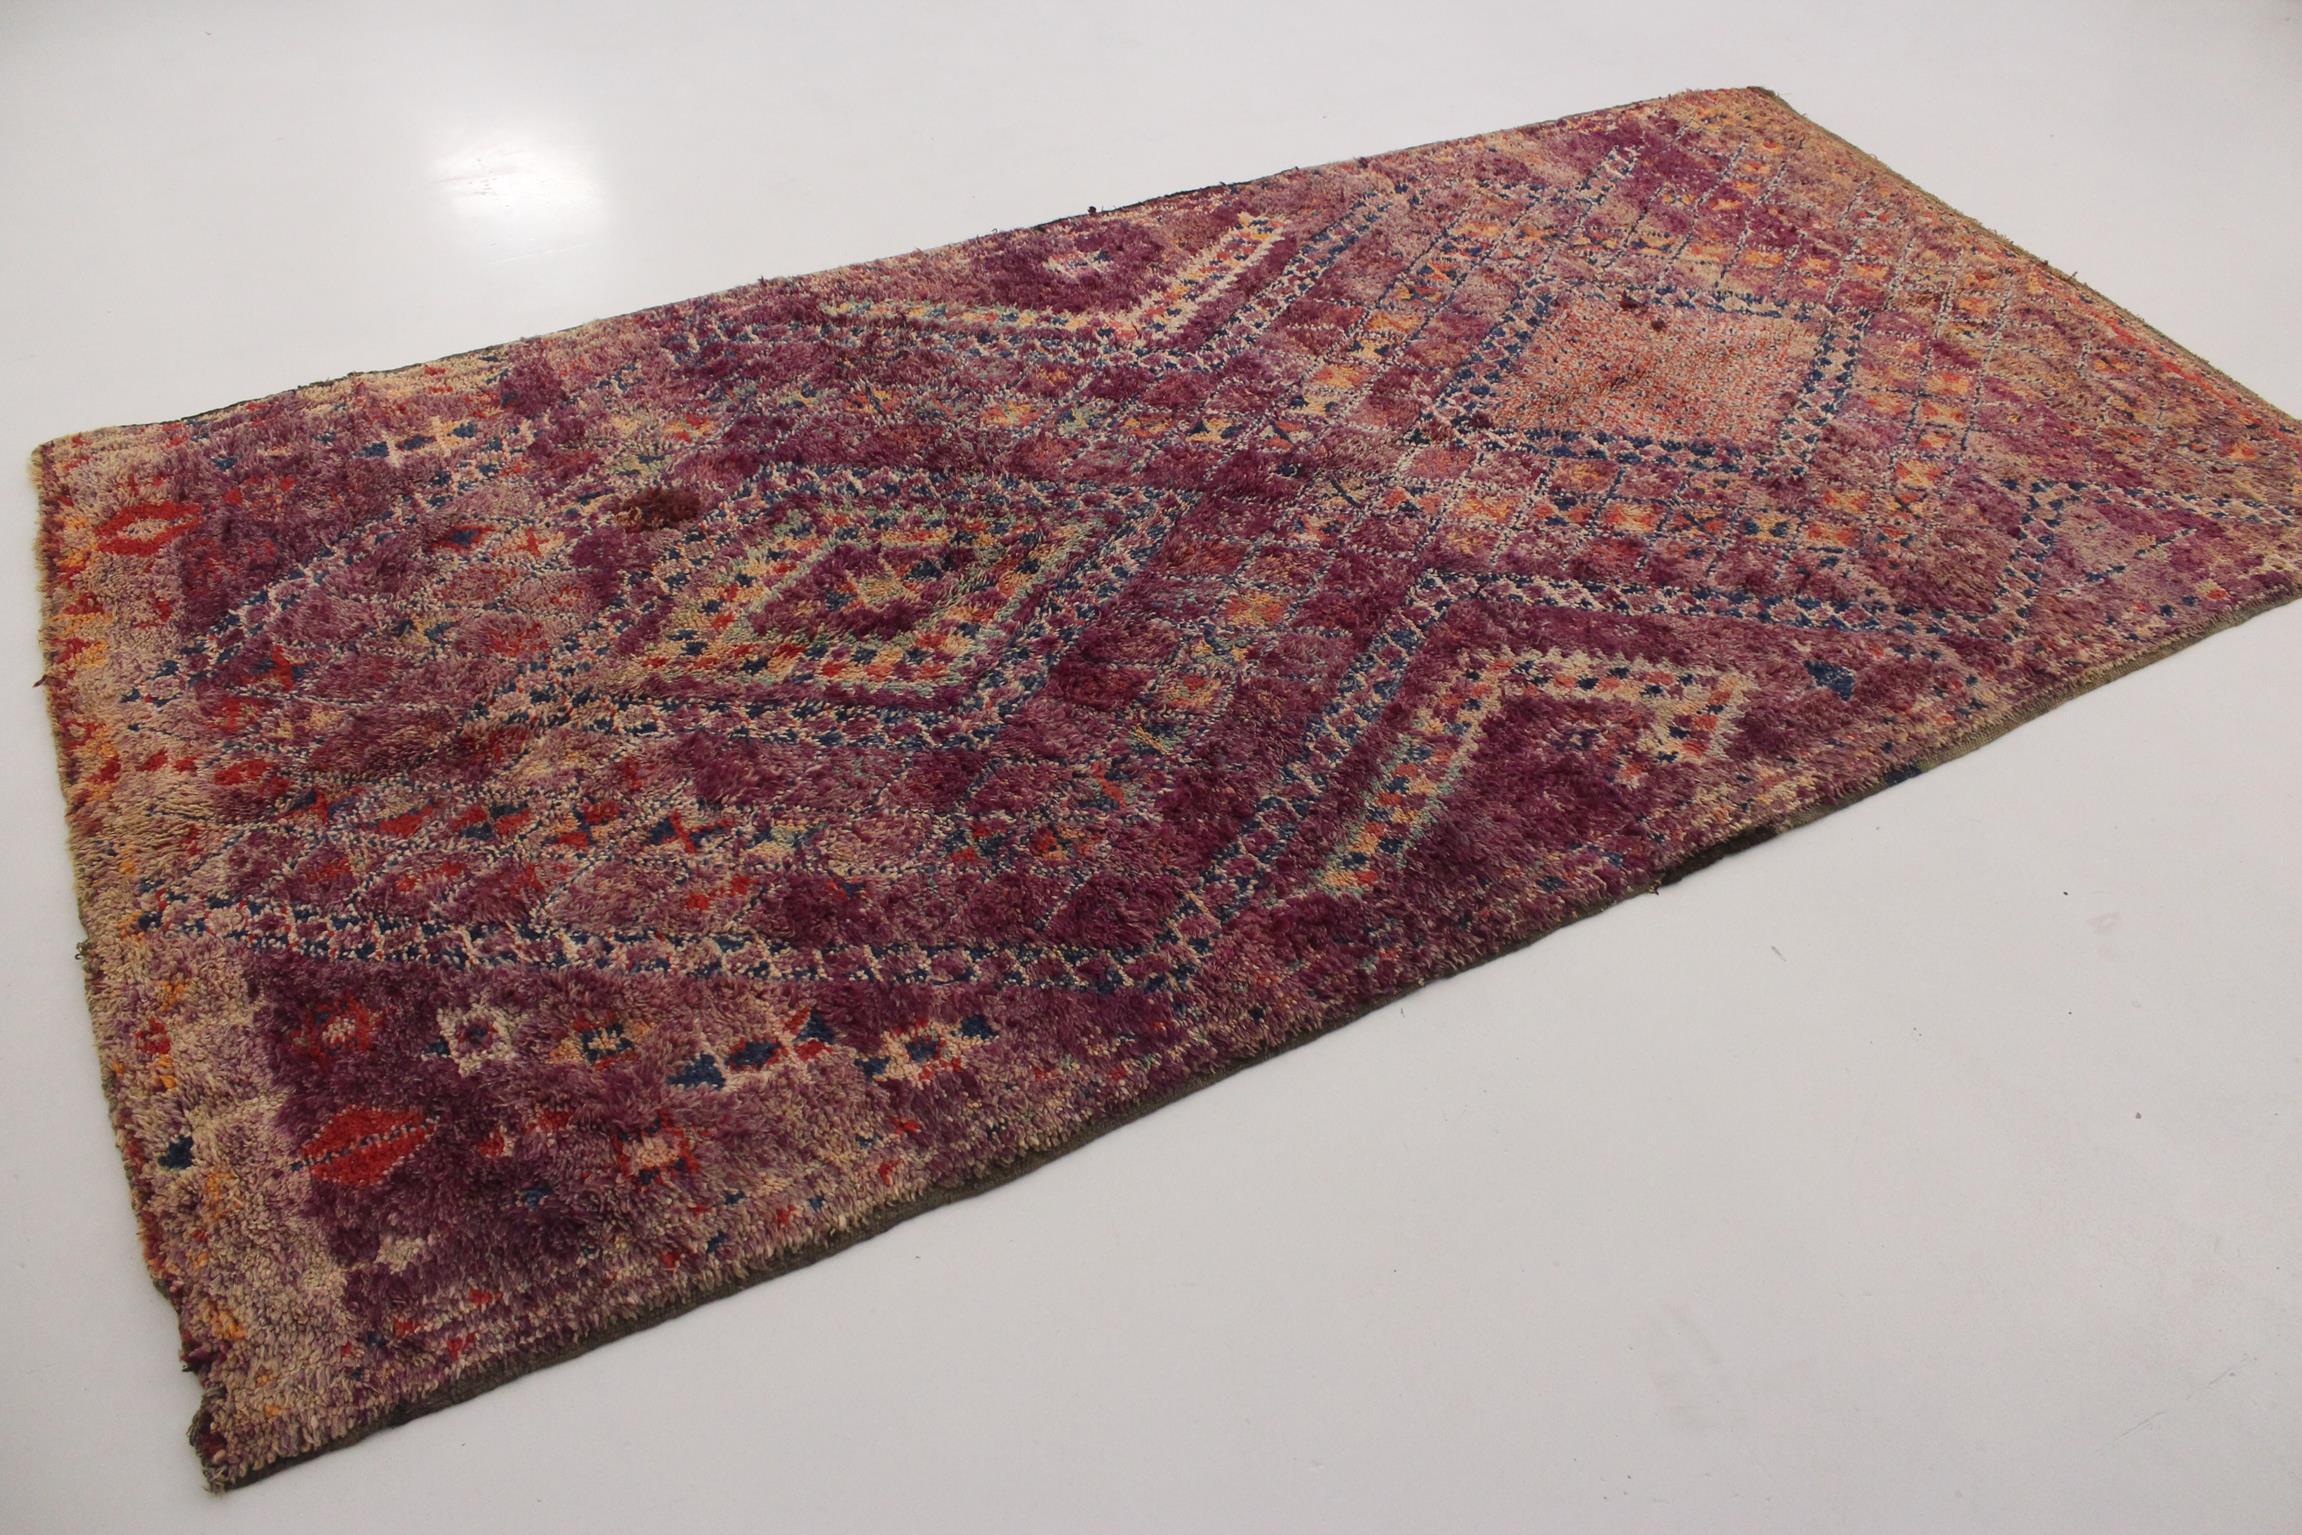 Vintage Moroccan Beni Mguild rug - Purple - 6.1x12feet / 187x368cm In Good Condition For Sale In Marrakech, MA